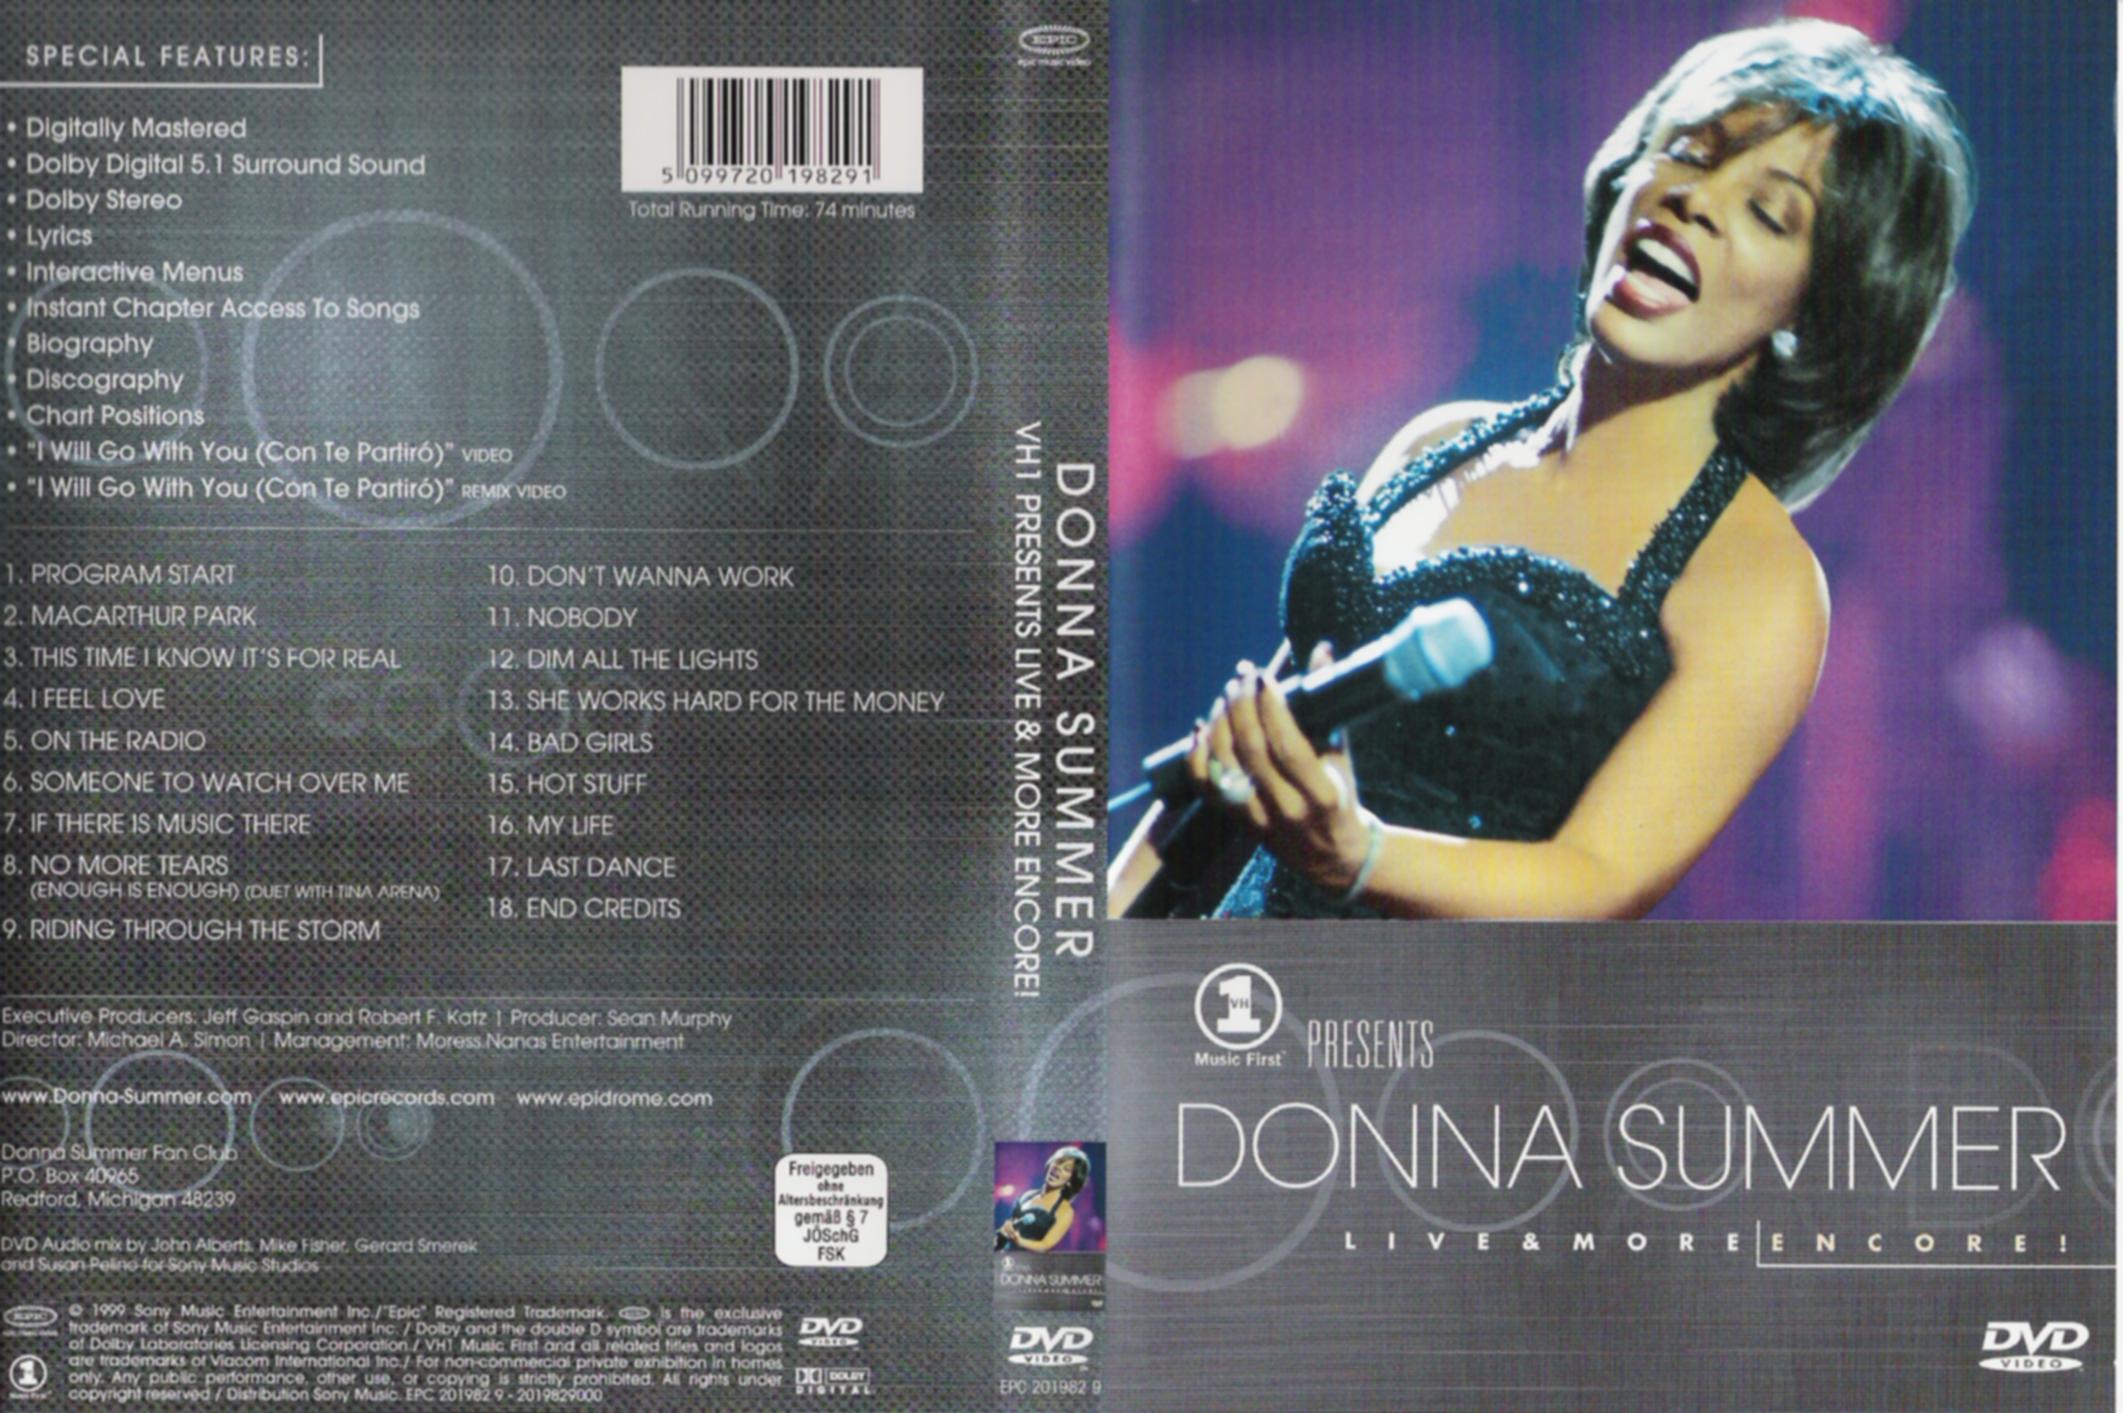 Jaquette DVD Donna summer Live and more encore